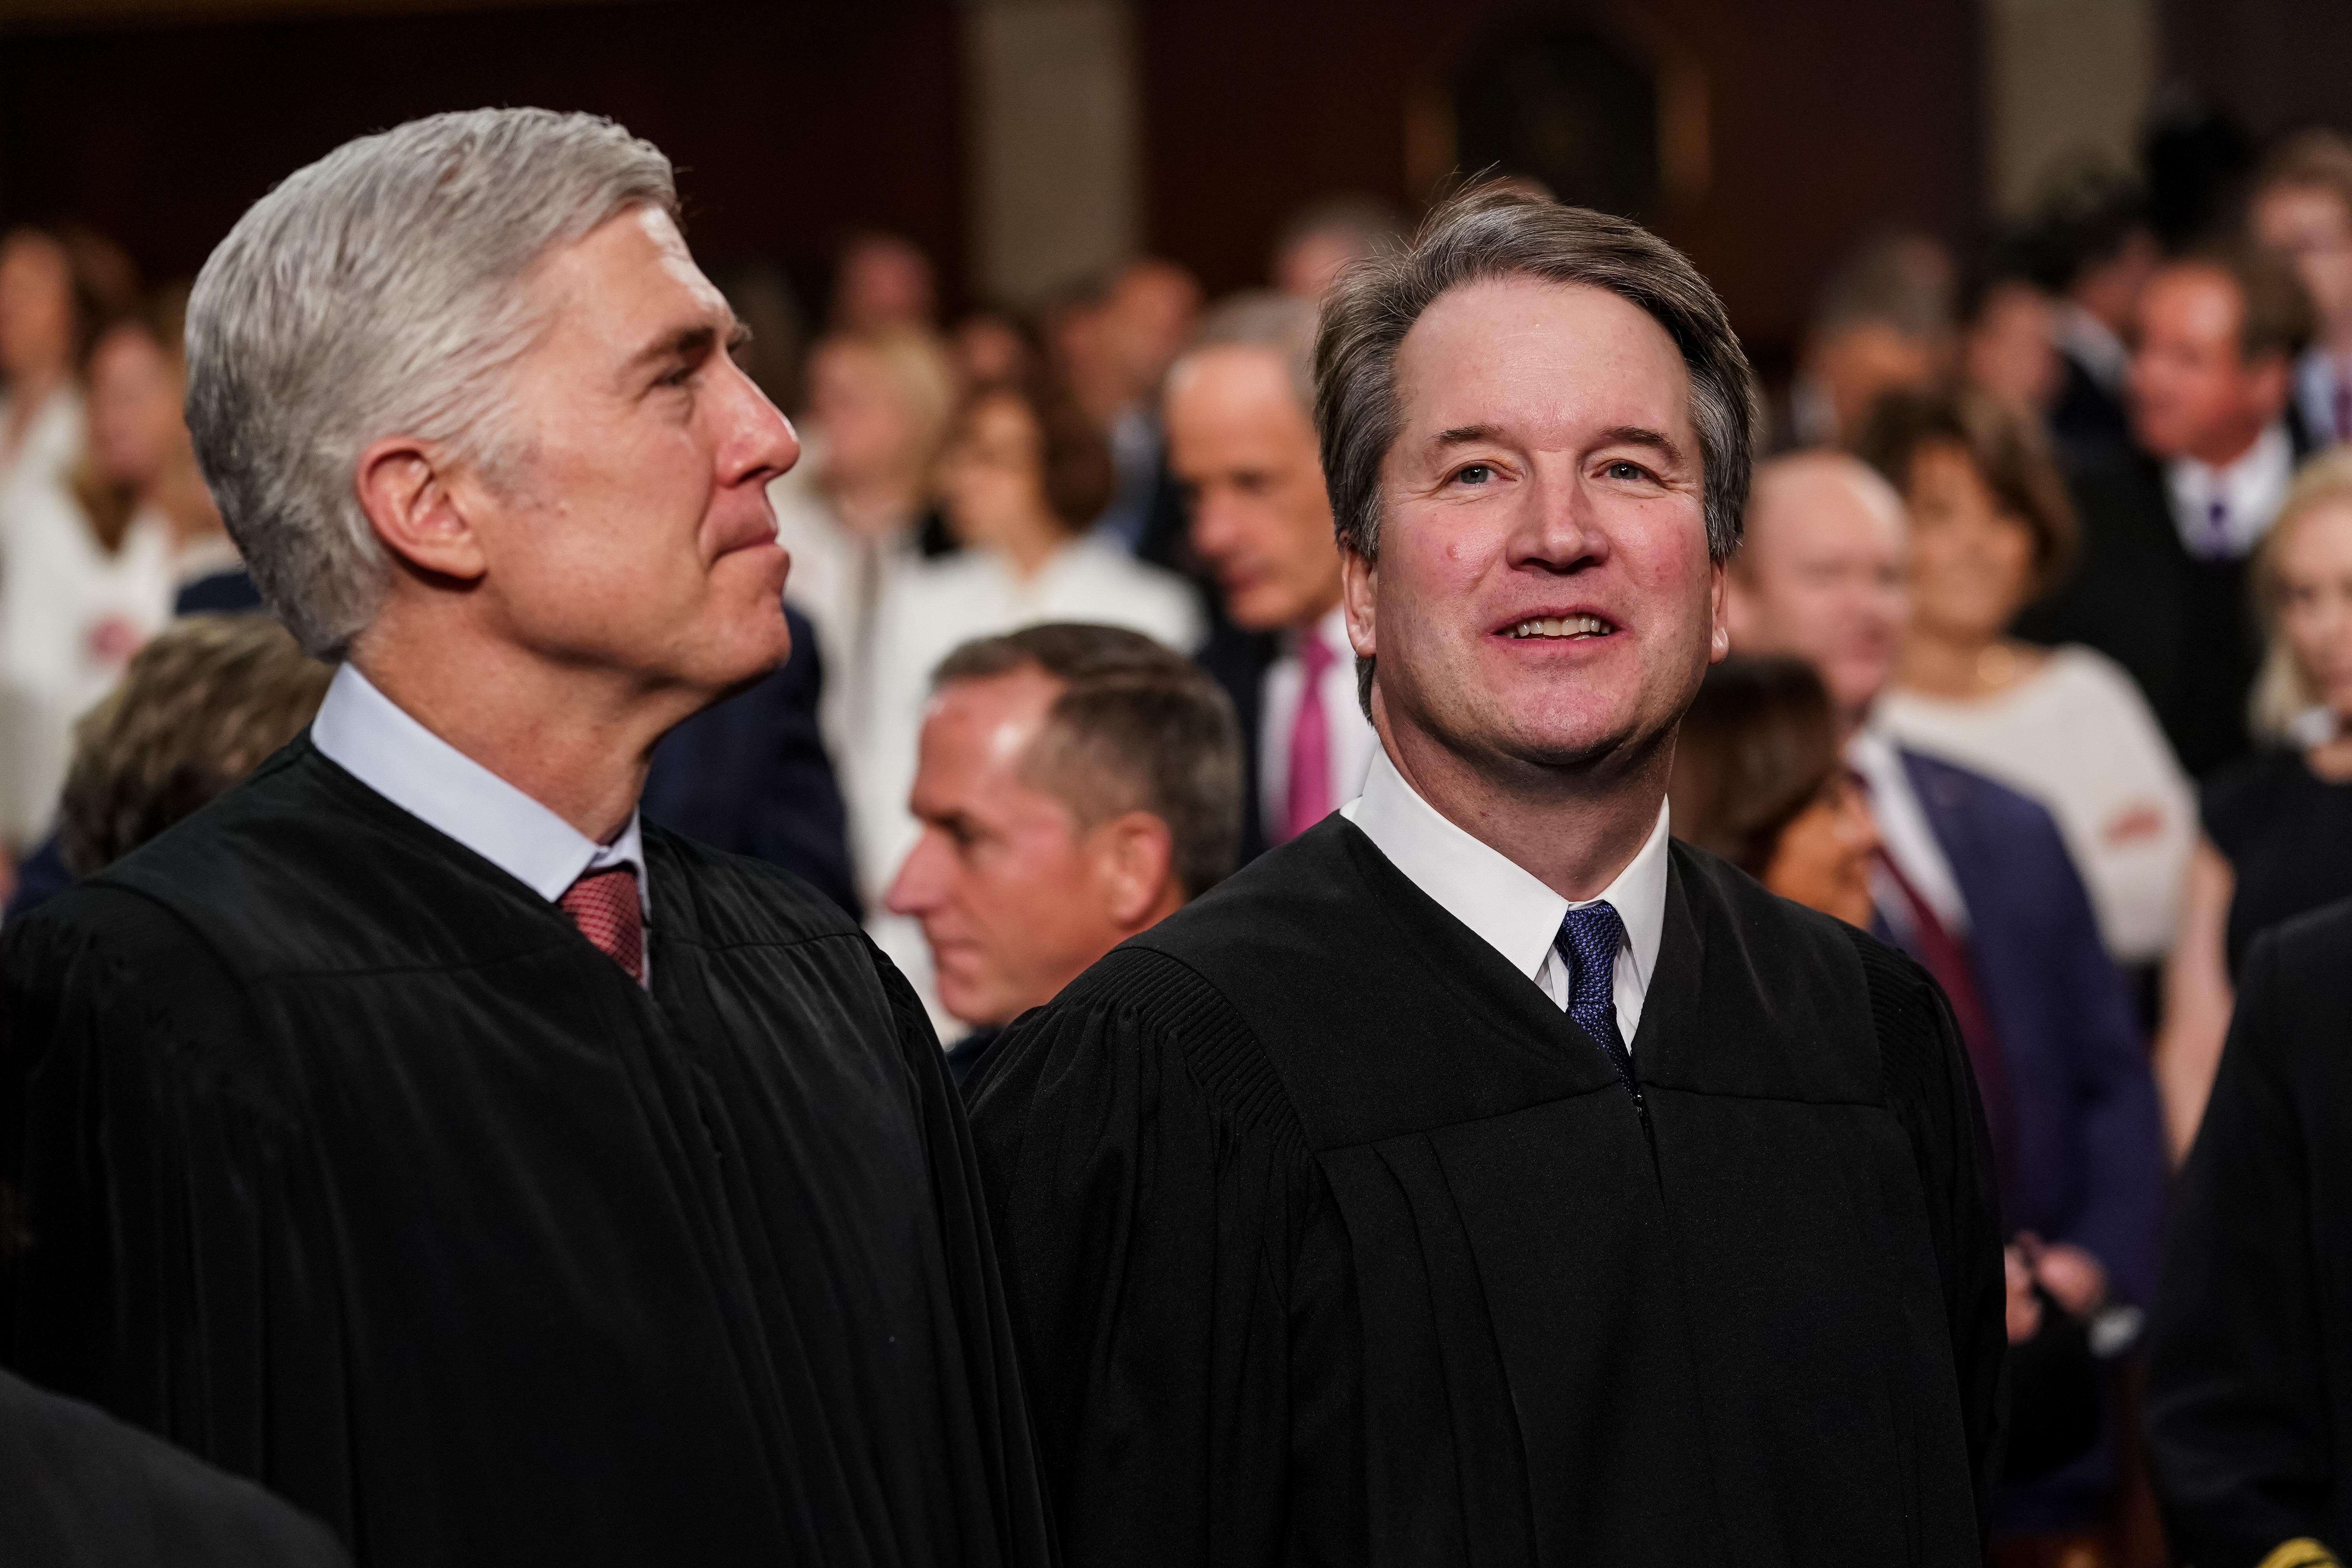 Supreme Court Justices Neil Gorsuch and Brett Kavanaugh attend the State of the Union address on Feb. 5.